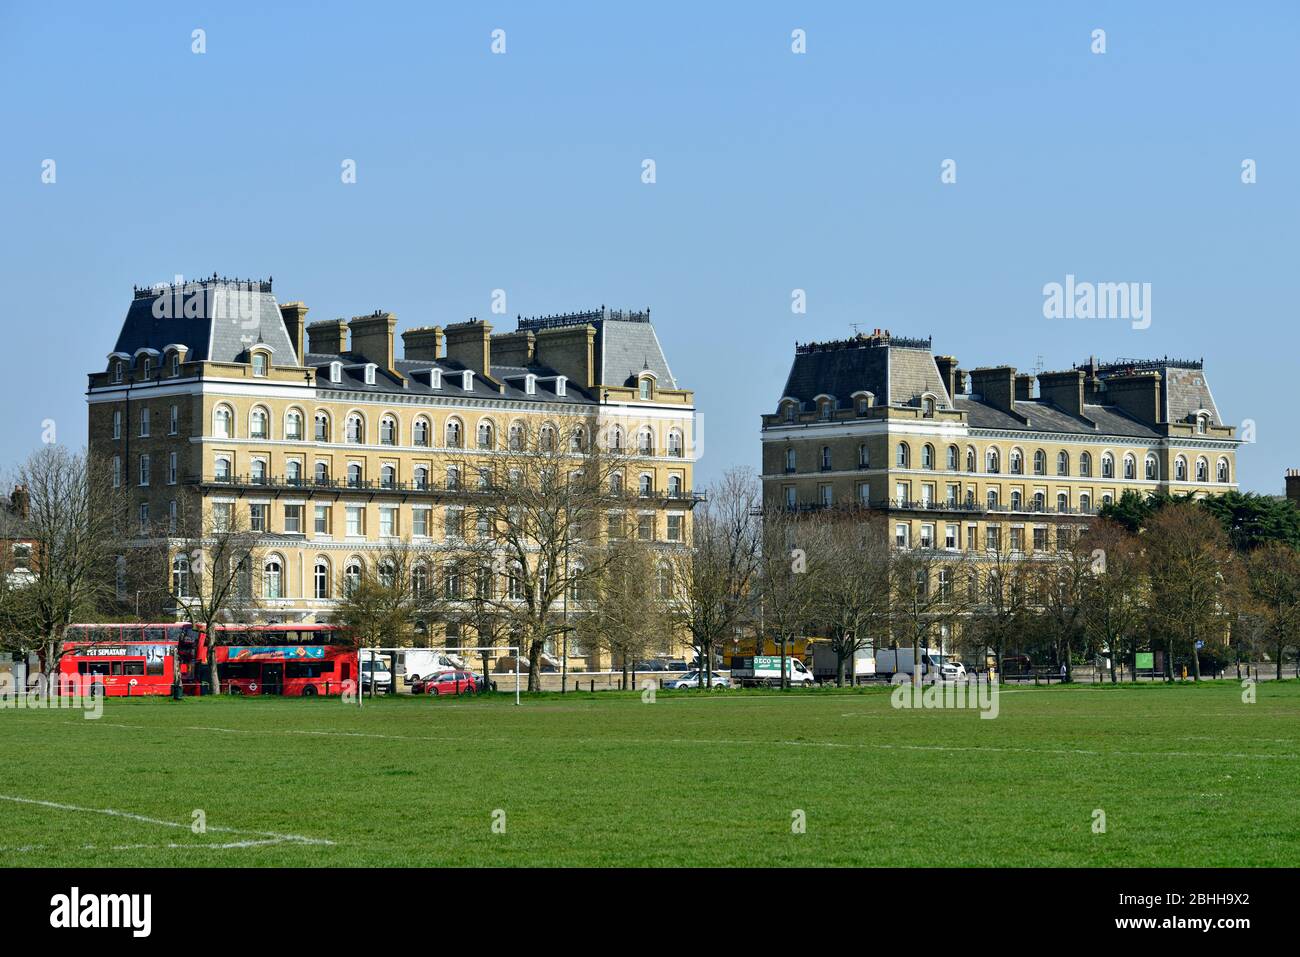 Clapham Common Playing fields, Clapham Common North Side, Londres, Royaume-Uni Banque D'Images